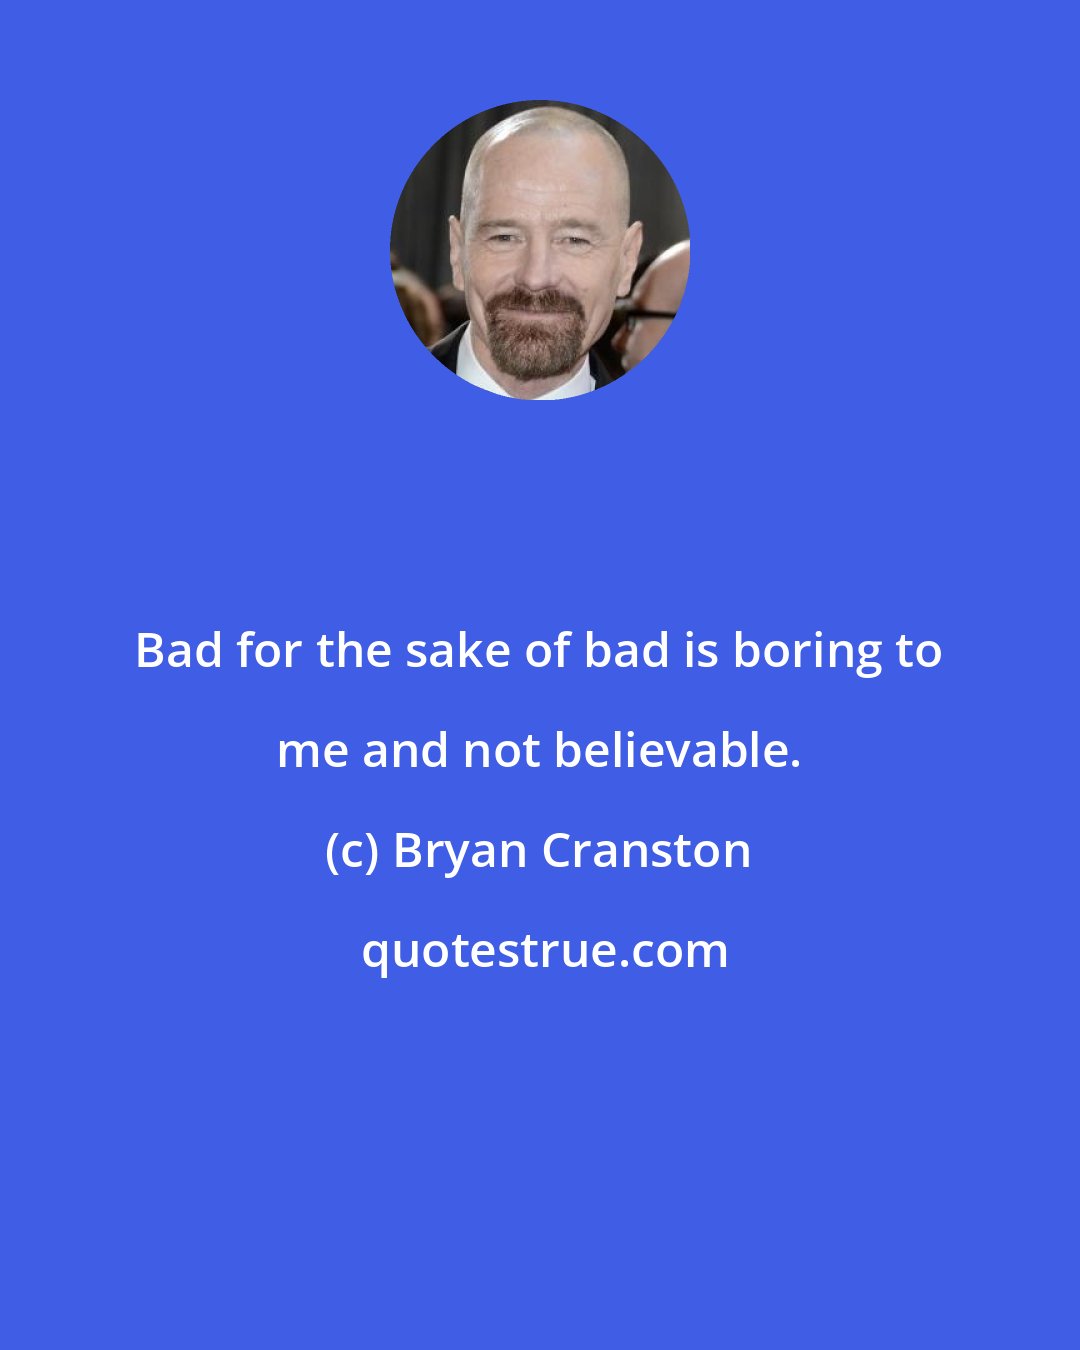 Bryan Cranston: Bad for the sake of bad is boring to me and not believable.